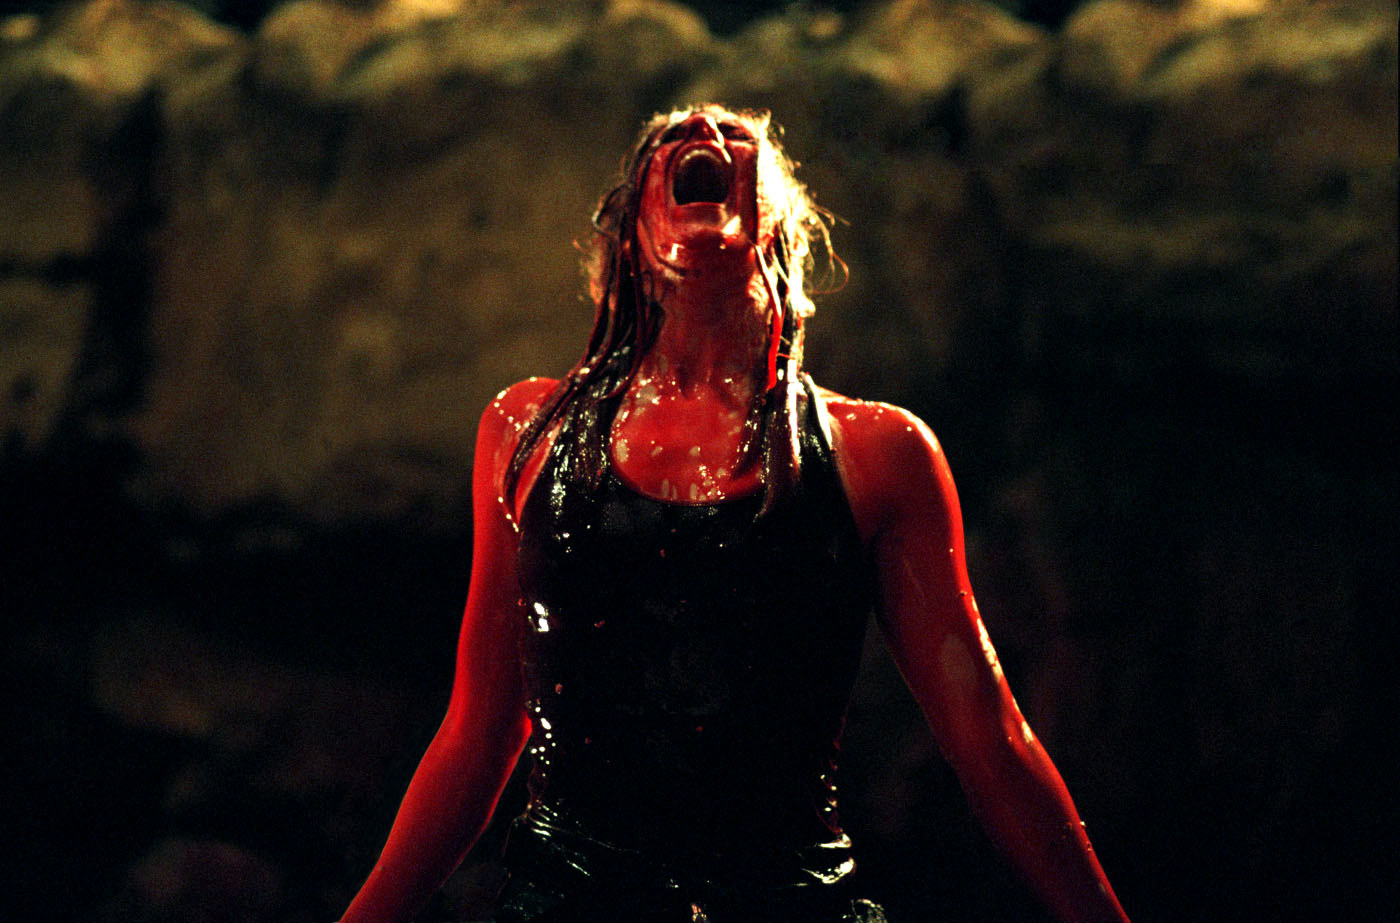 Shauna Macdonald as Sarah, screaming up at the sky covered in blood